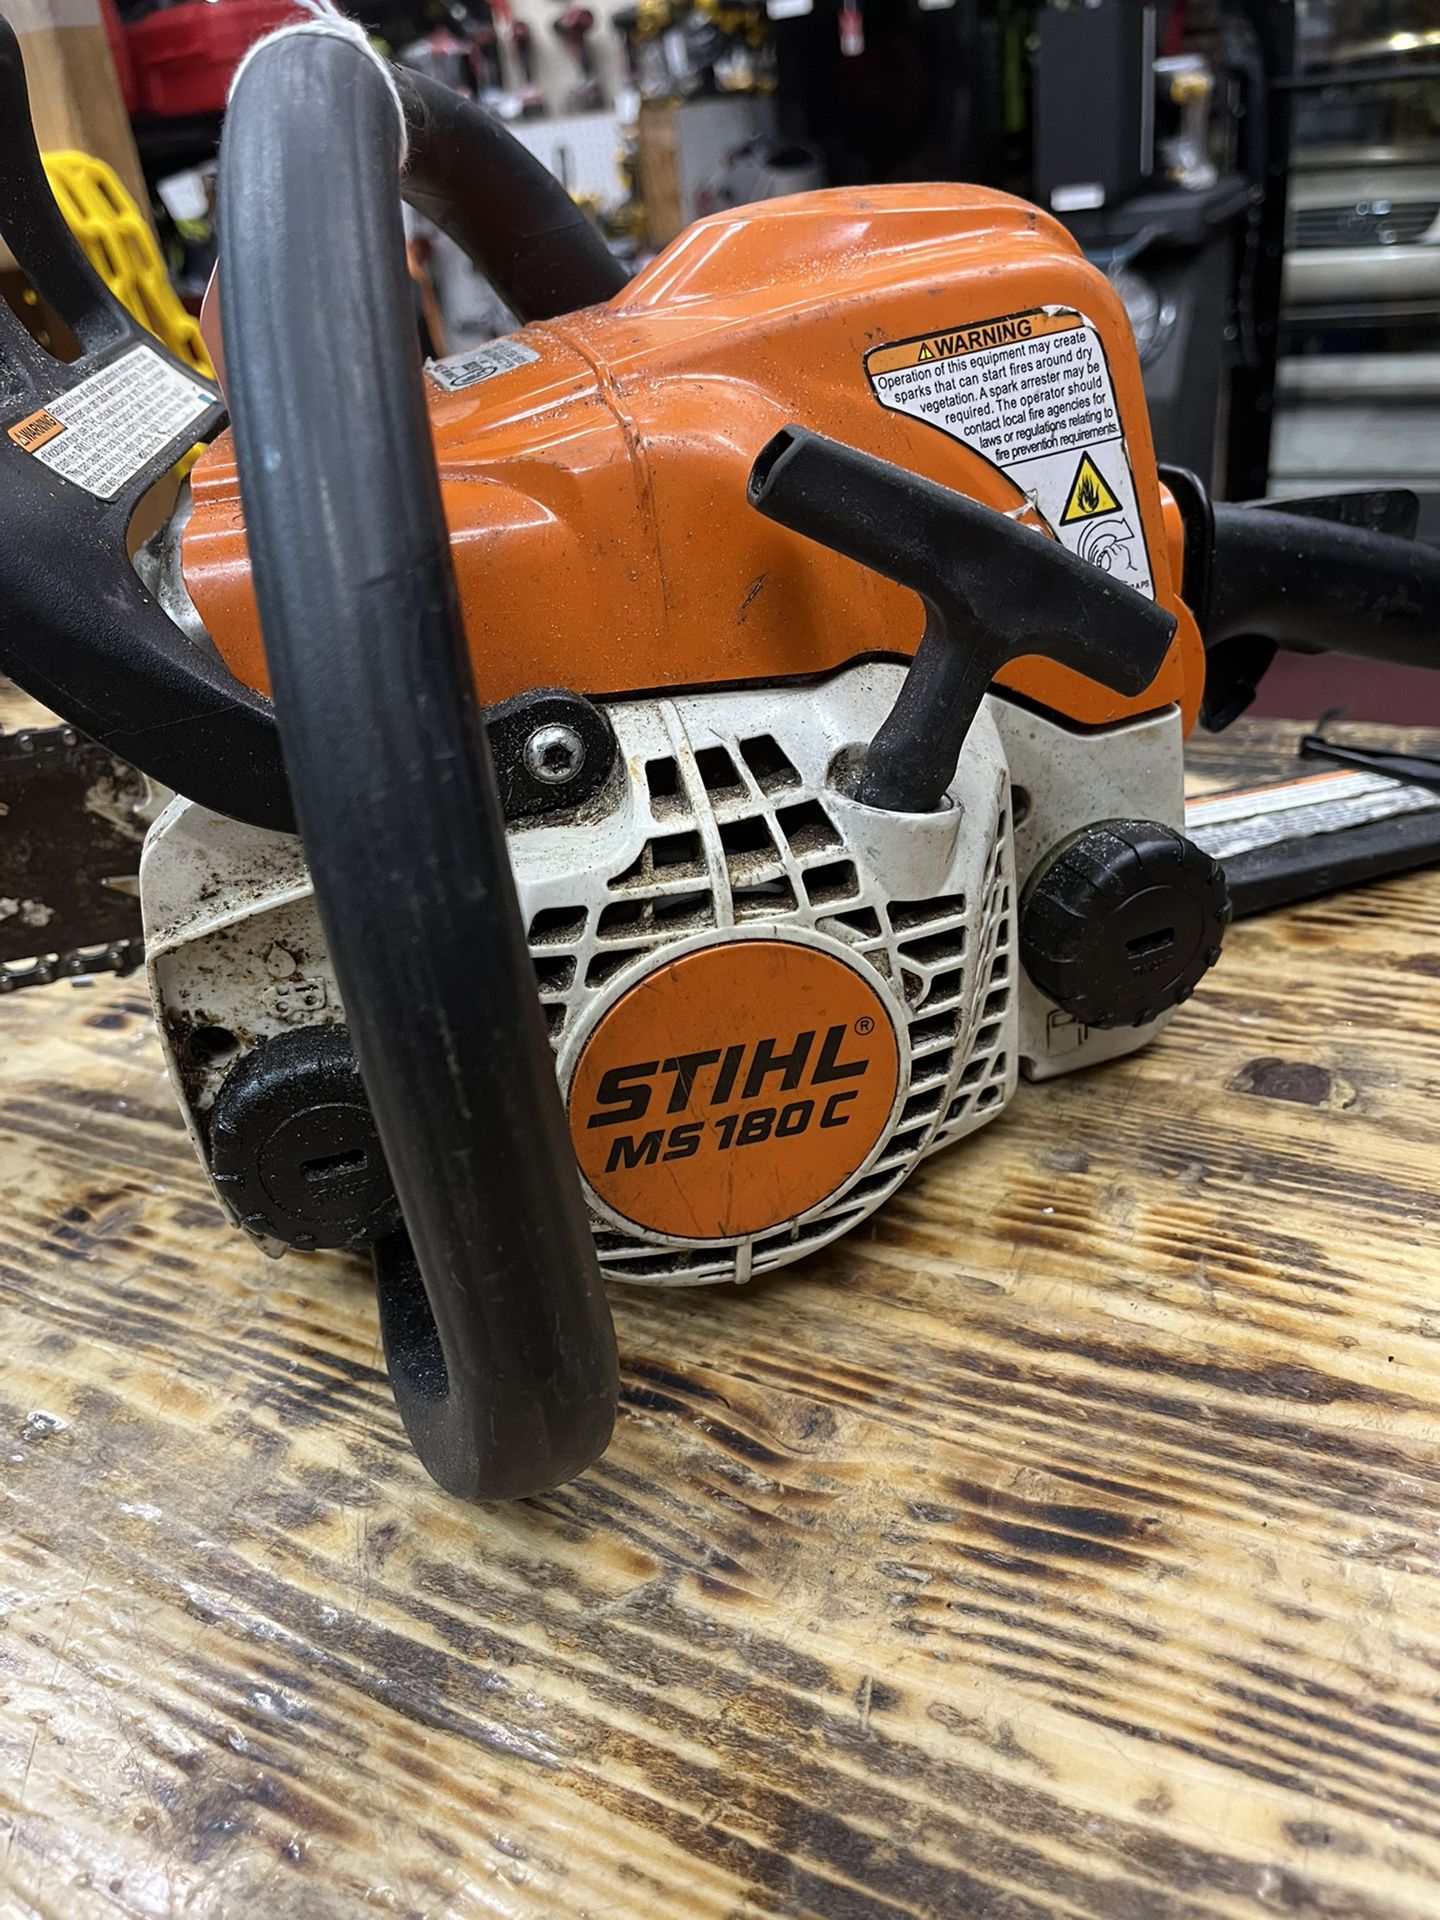 Stihl Ms180c Chainsaw For Sale In Tampa Fl Offerup